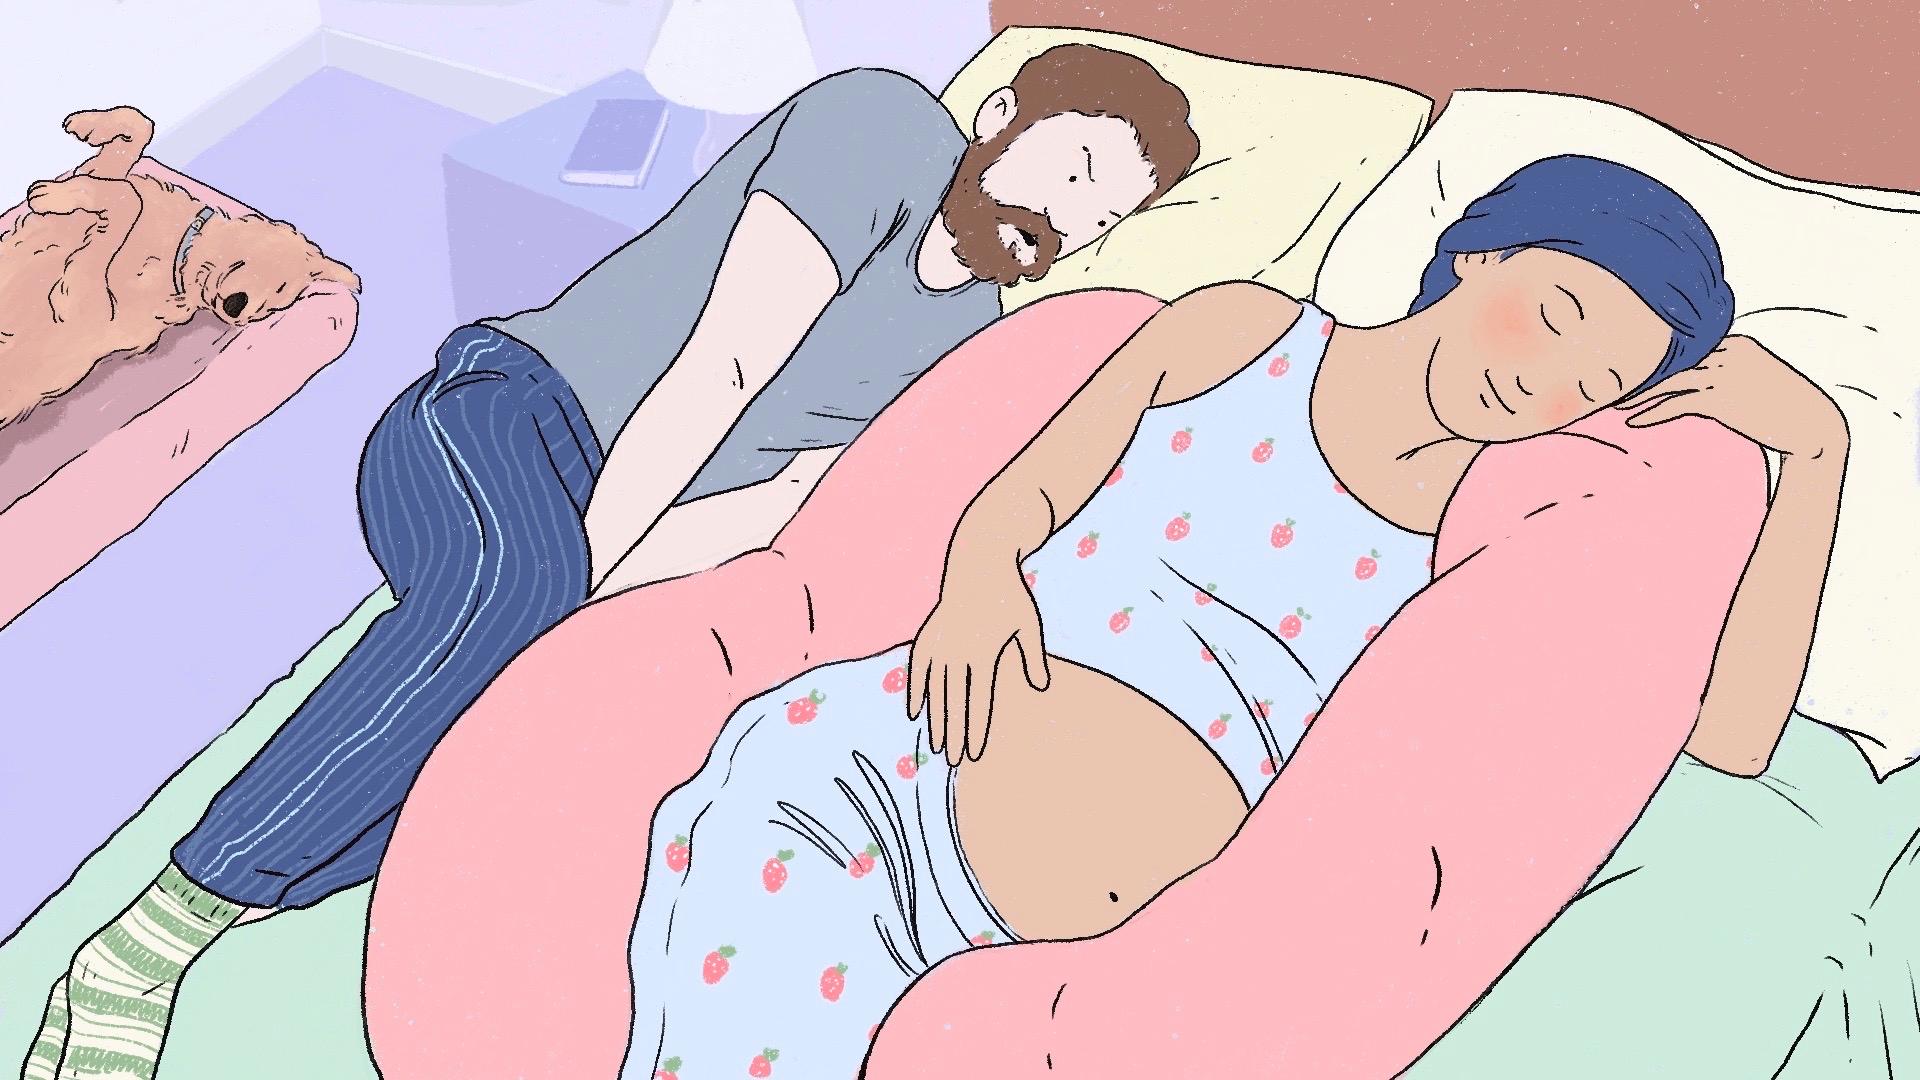 Sleeping With Pillow Between Legs; Can It Benefit Pregnant Women? 